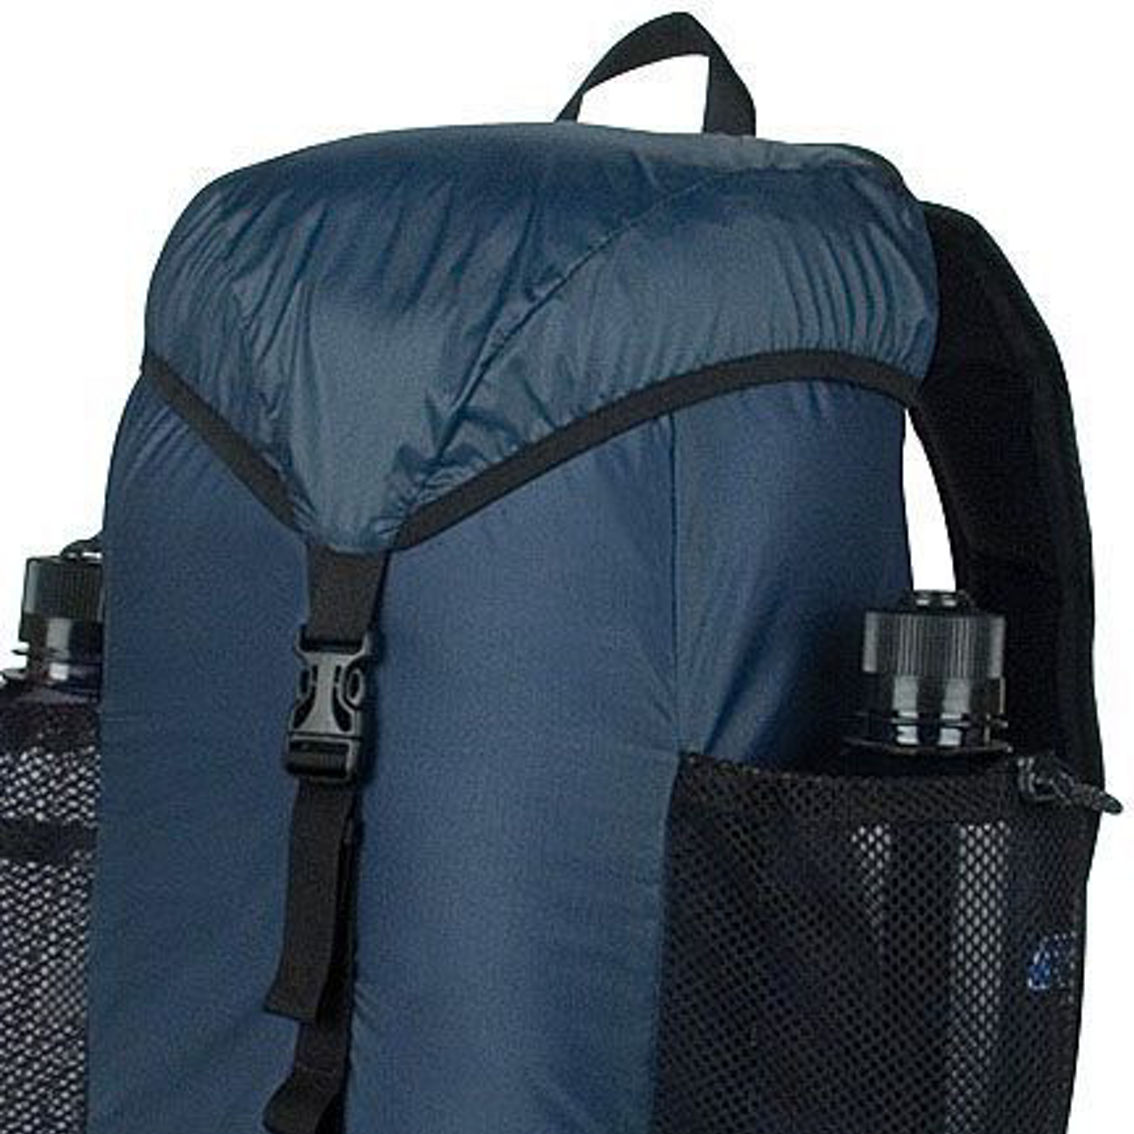 ULTRALIGHT PARULA DAY PACK - Image 2 of 2